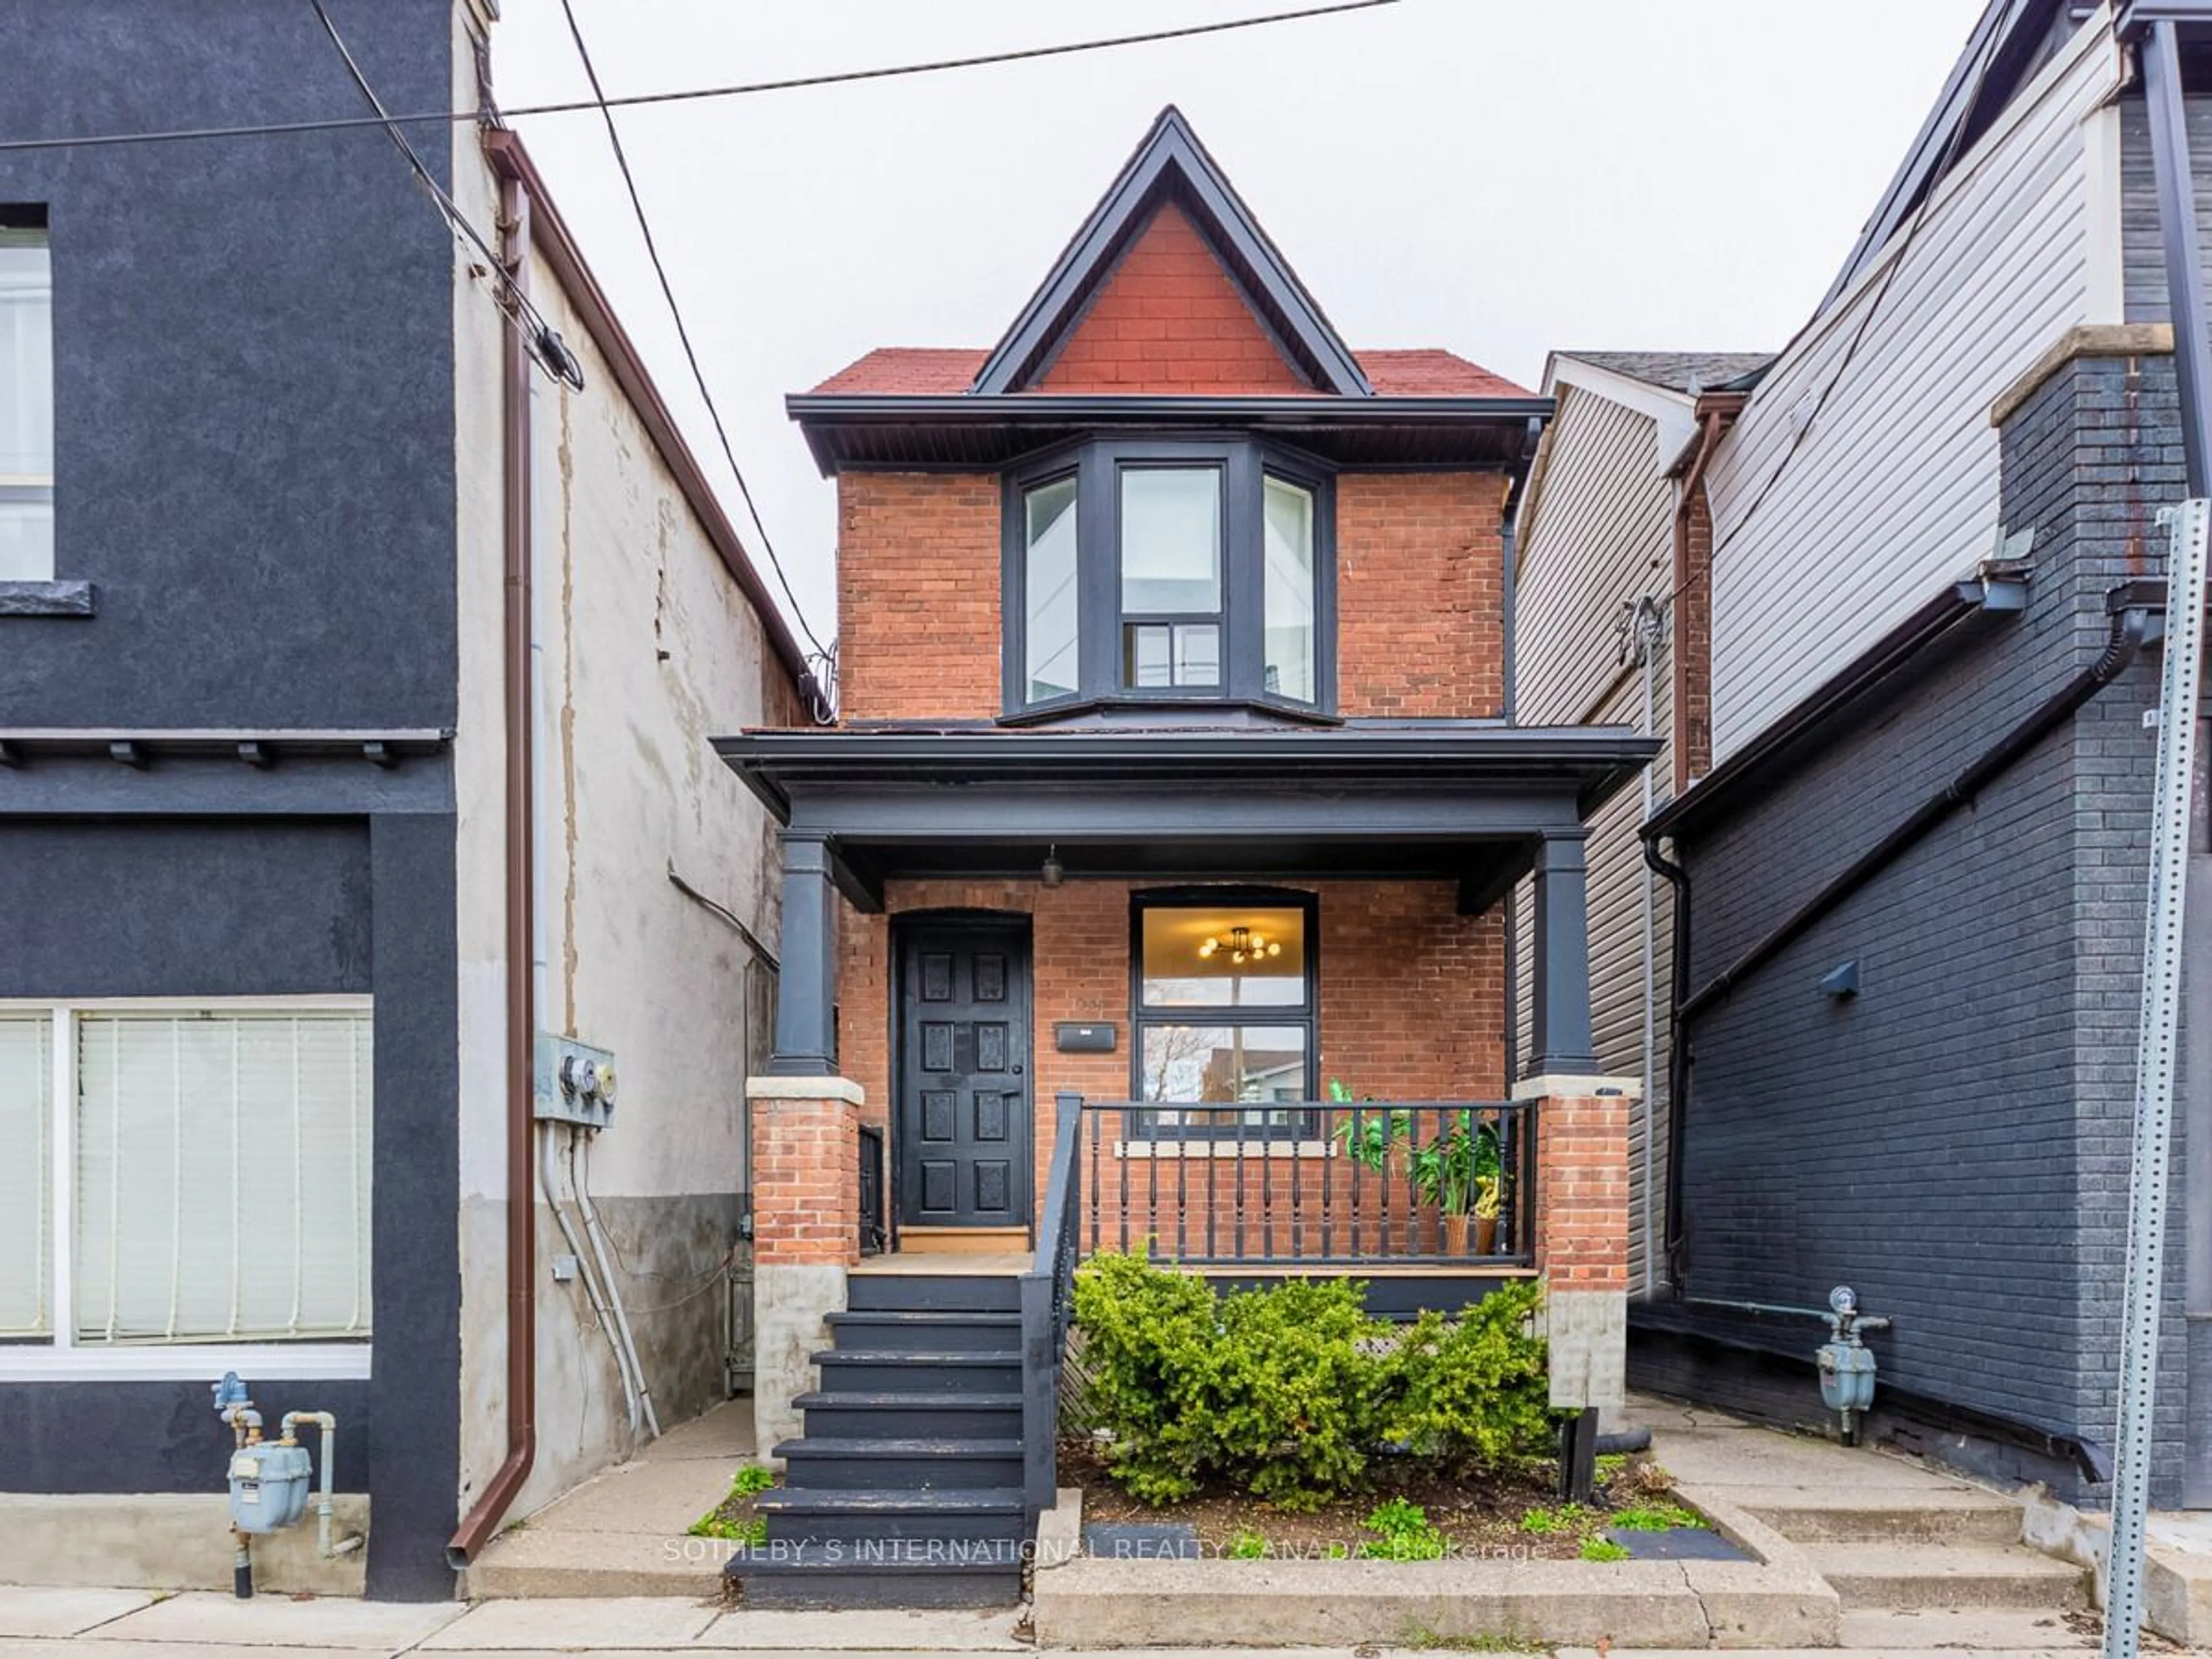 Home with brick exterior material for 1055 Woodbine Ave, Toronto Ontario M4C 4C2